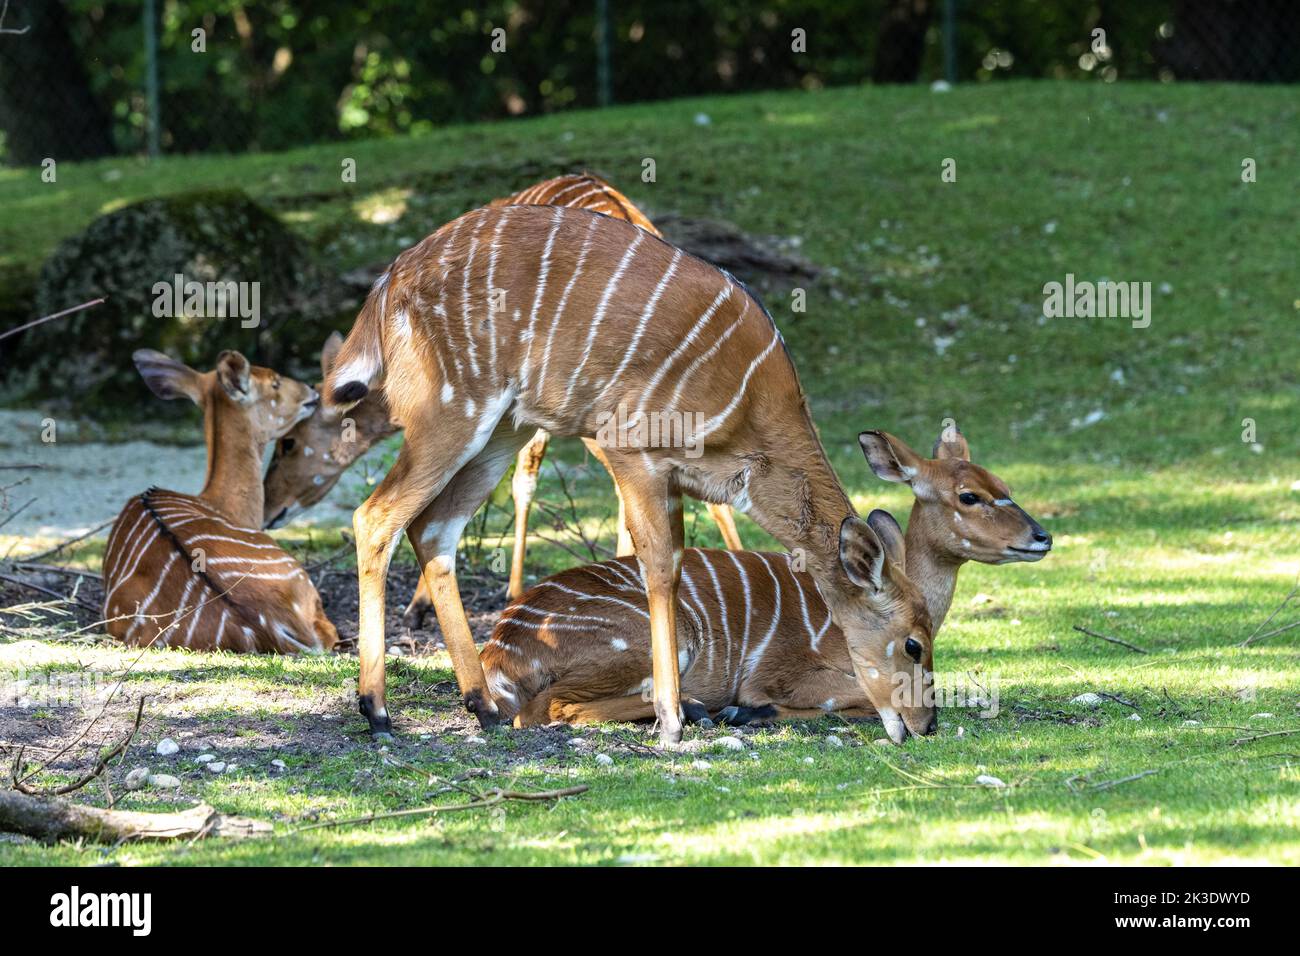 The nyala, Tragelaphus angasii is a spiral-horned antelope native to Southern Africa. It is a species of the family Bovidae and genus Nyala, also cons Stock Photo